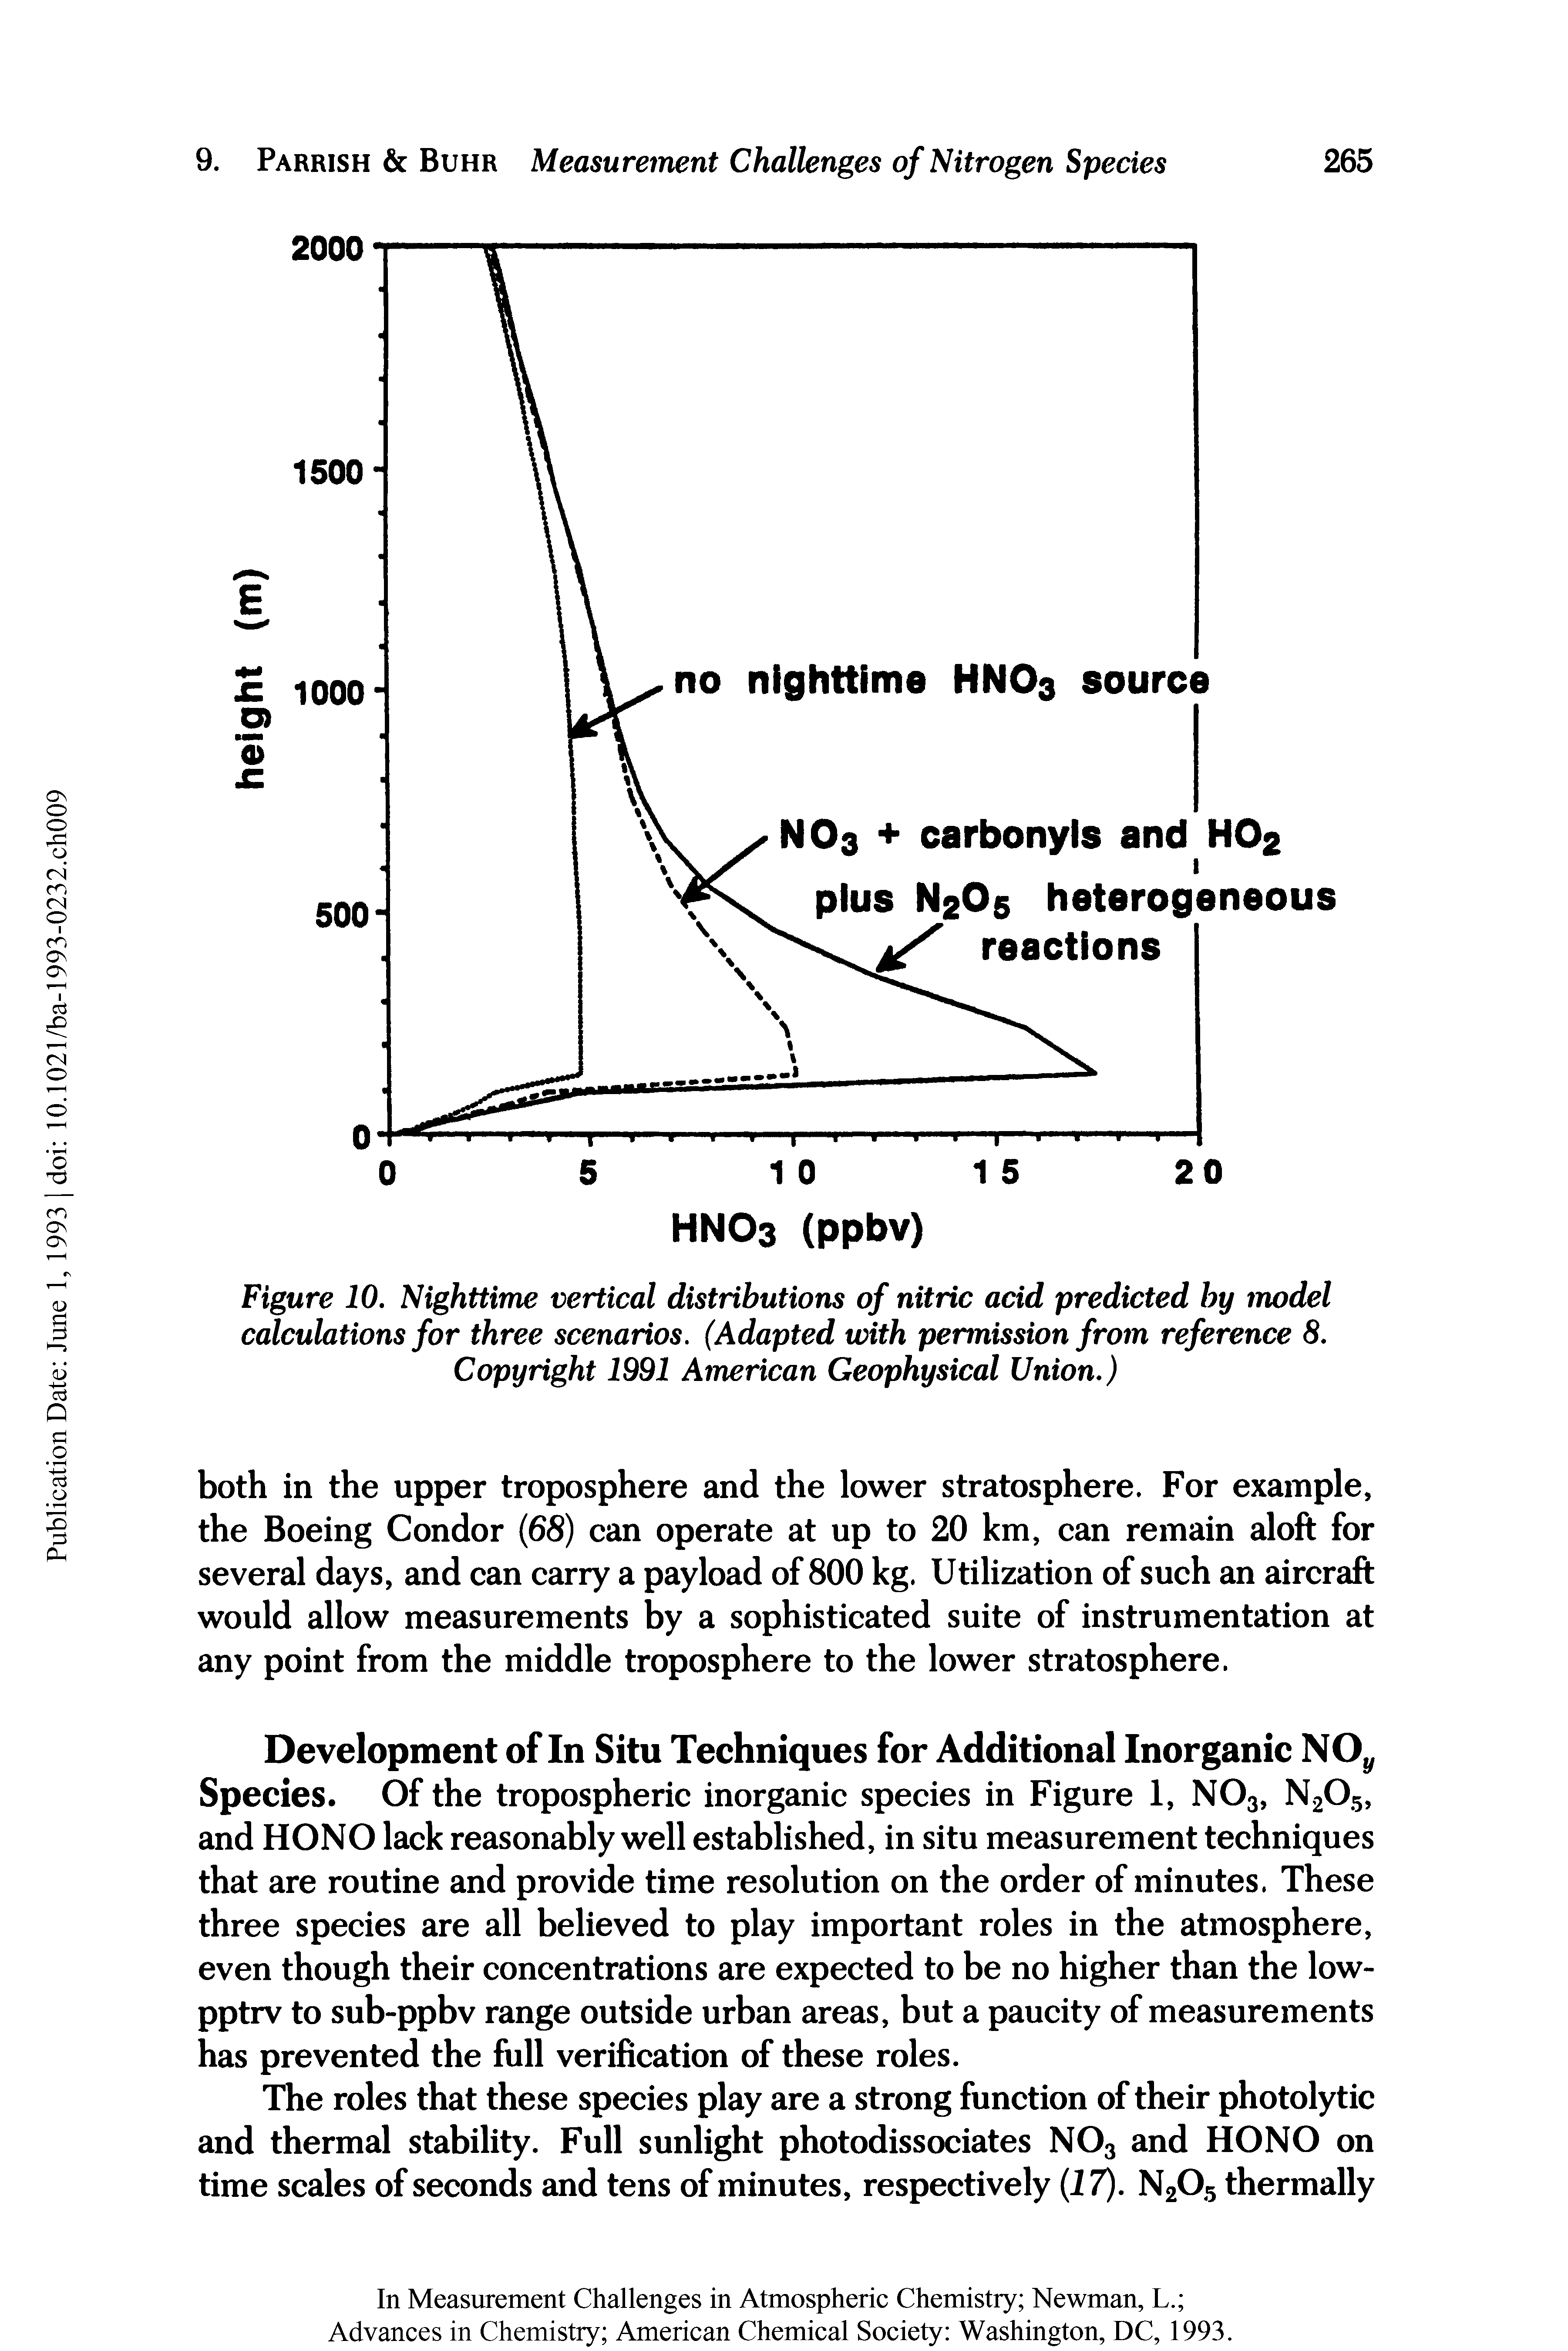 Figure 10. Nighttime vertical distributions of nitric acid predicted by model calculations for three scenarios. (Adapted with permission from reference 8. Copyright 1991 American Geophysical Union.)...